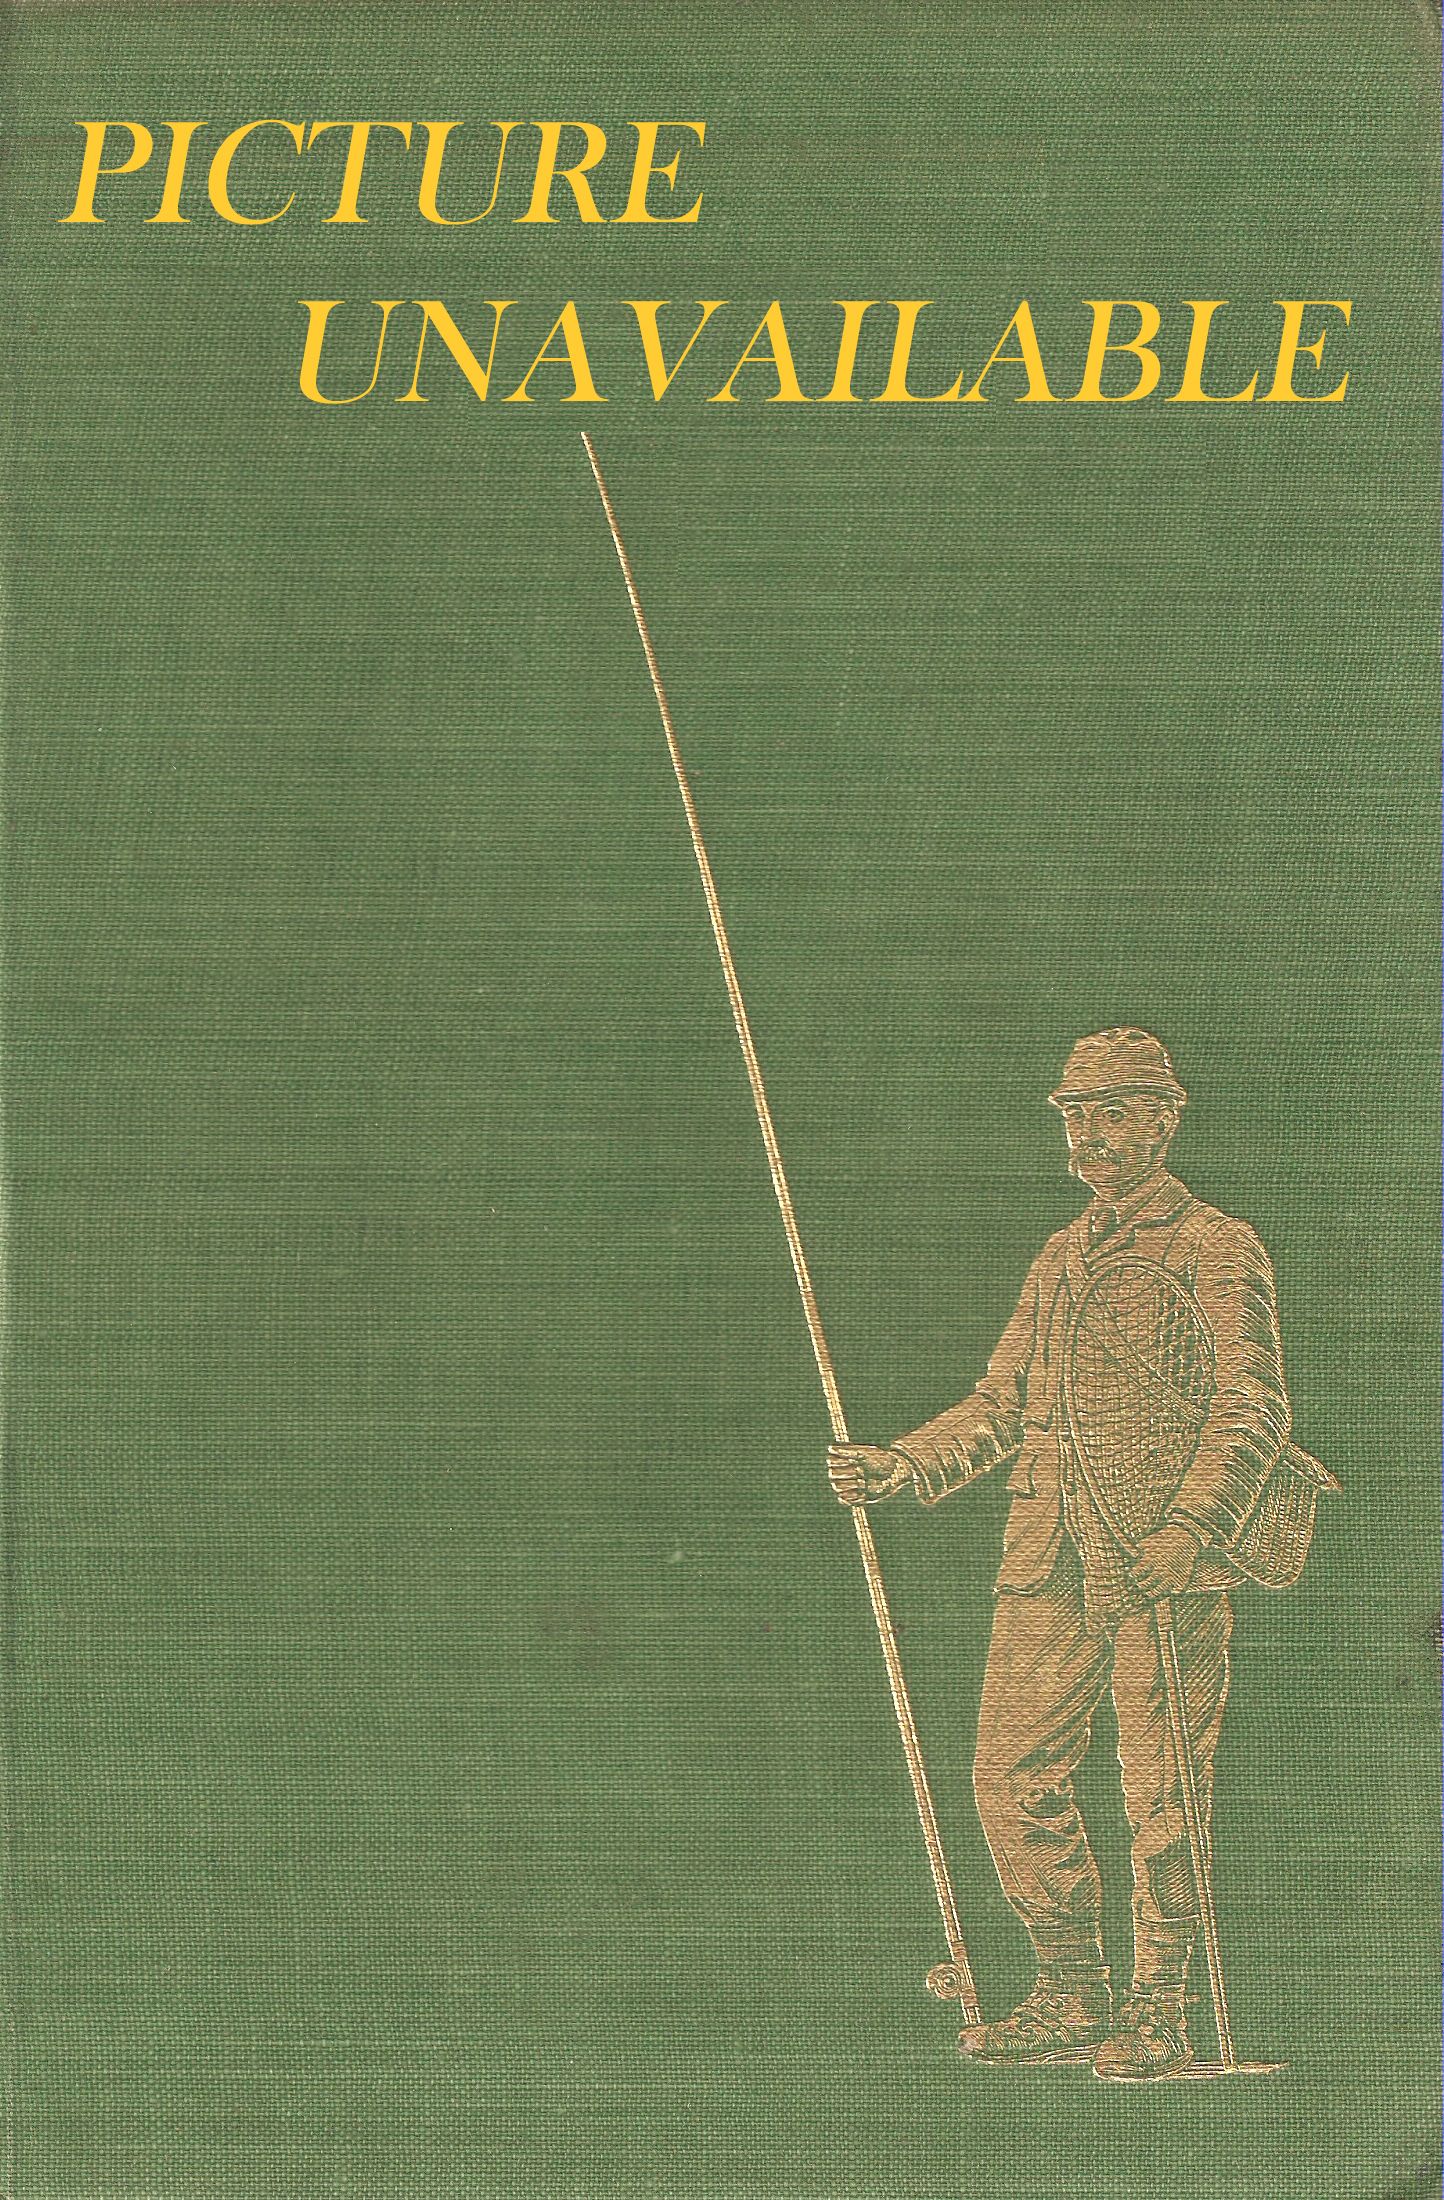 ANGLING CONCLUSIONS. By W.F.R. Reynolds. Illustrated by C.F. Tunnicliffe.